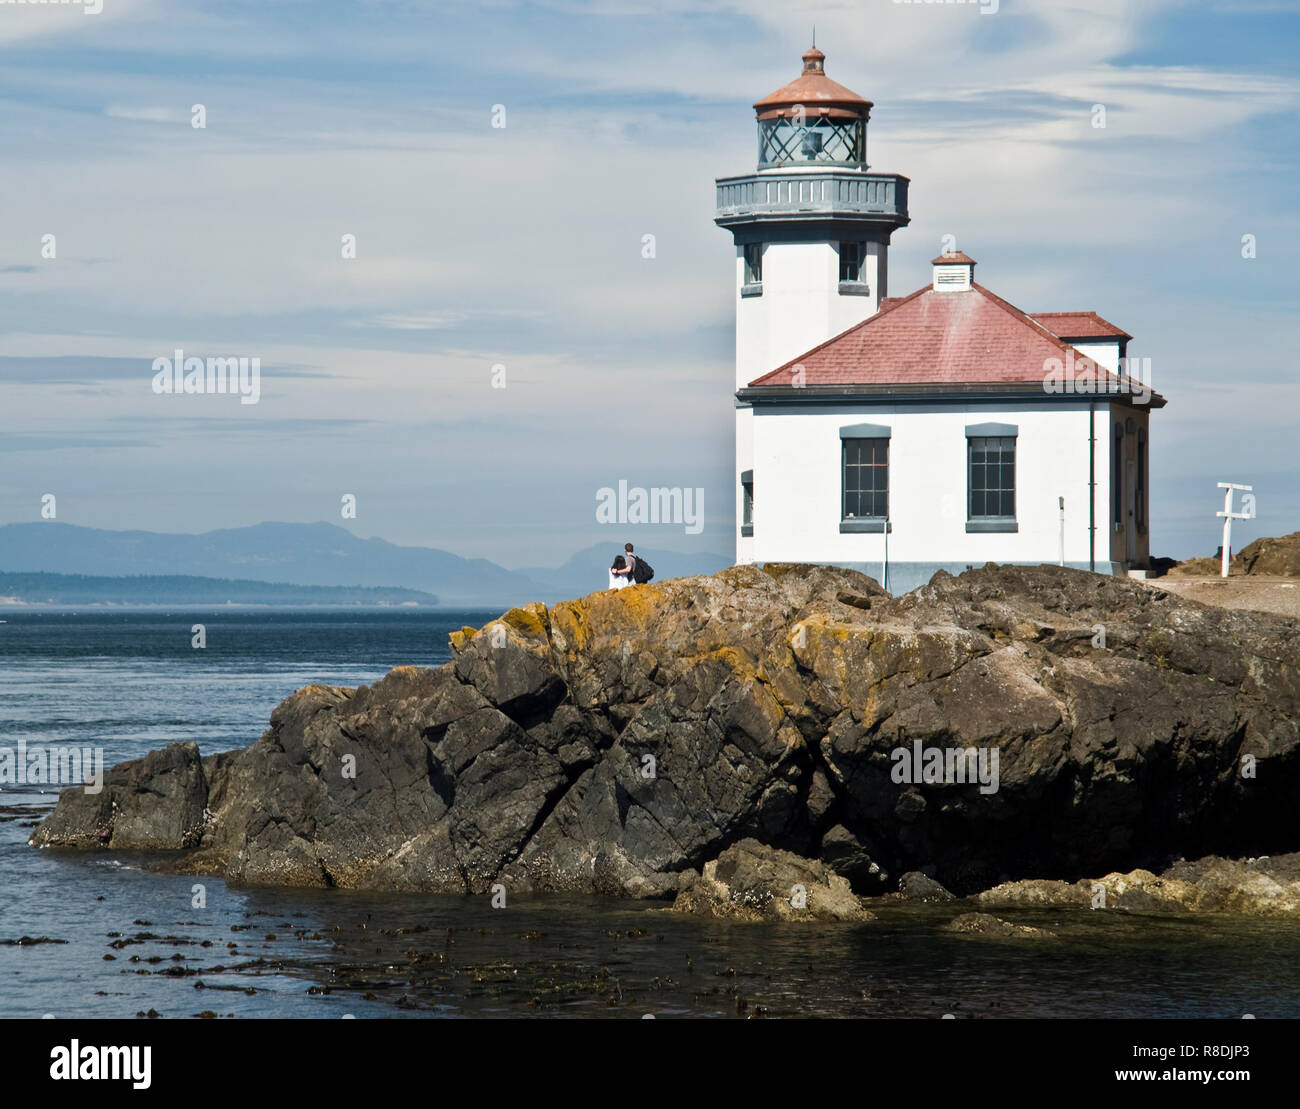 Built in 1919,the Lime Kiln lighthouse overlooks Dead Man's Bay on the western side of San Juan Island in Washington and is still functioning today. Stock Photo